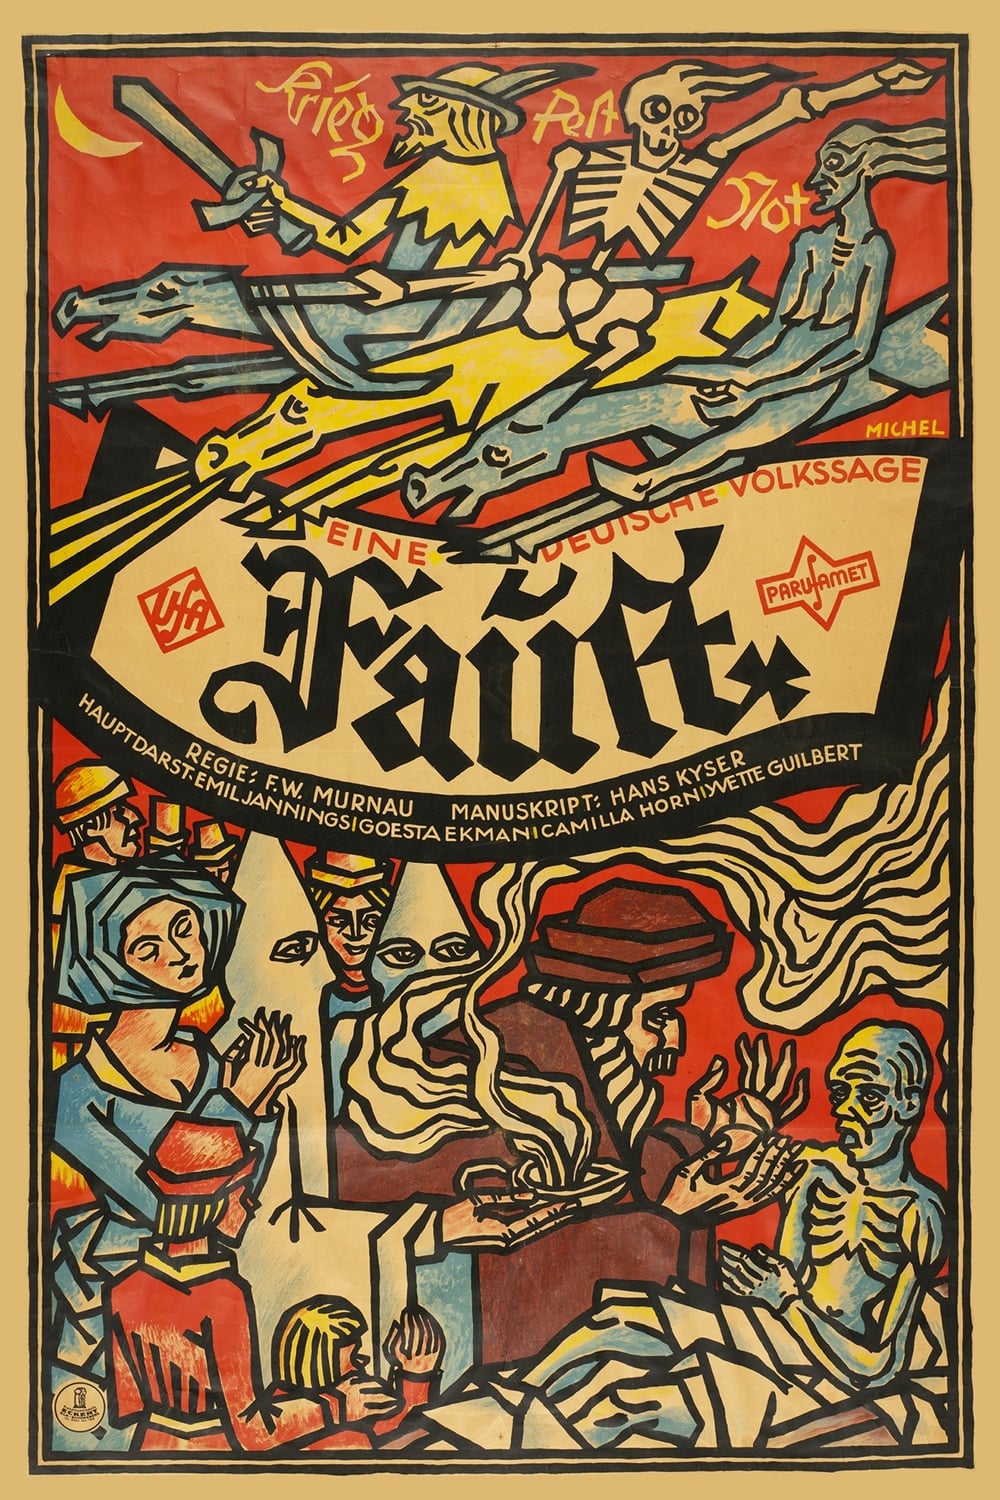 Faust (1926)